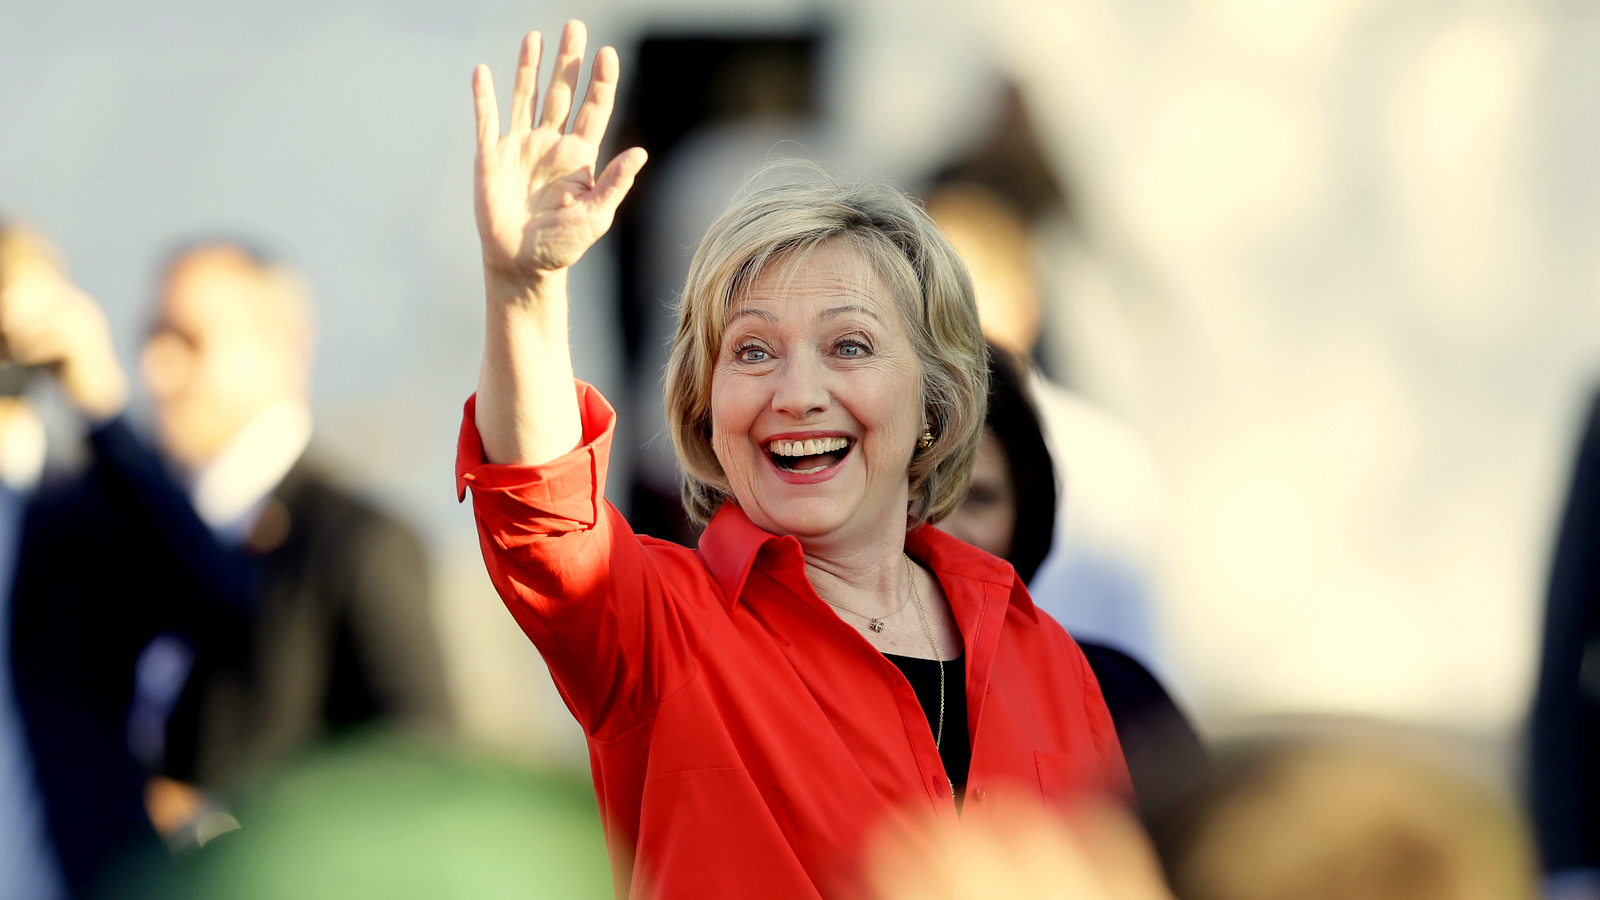 Democratic presidential candidate Hillary Rodham Clinton waves to supporter as she arrives at a town hall meeting, Tuesday, Nov. 3, 2015, in Coralville, Iowa. (AP Photo/Charlie Neibergall)